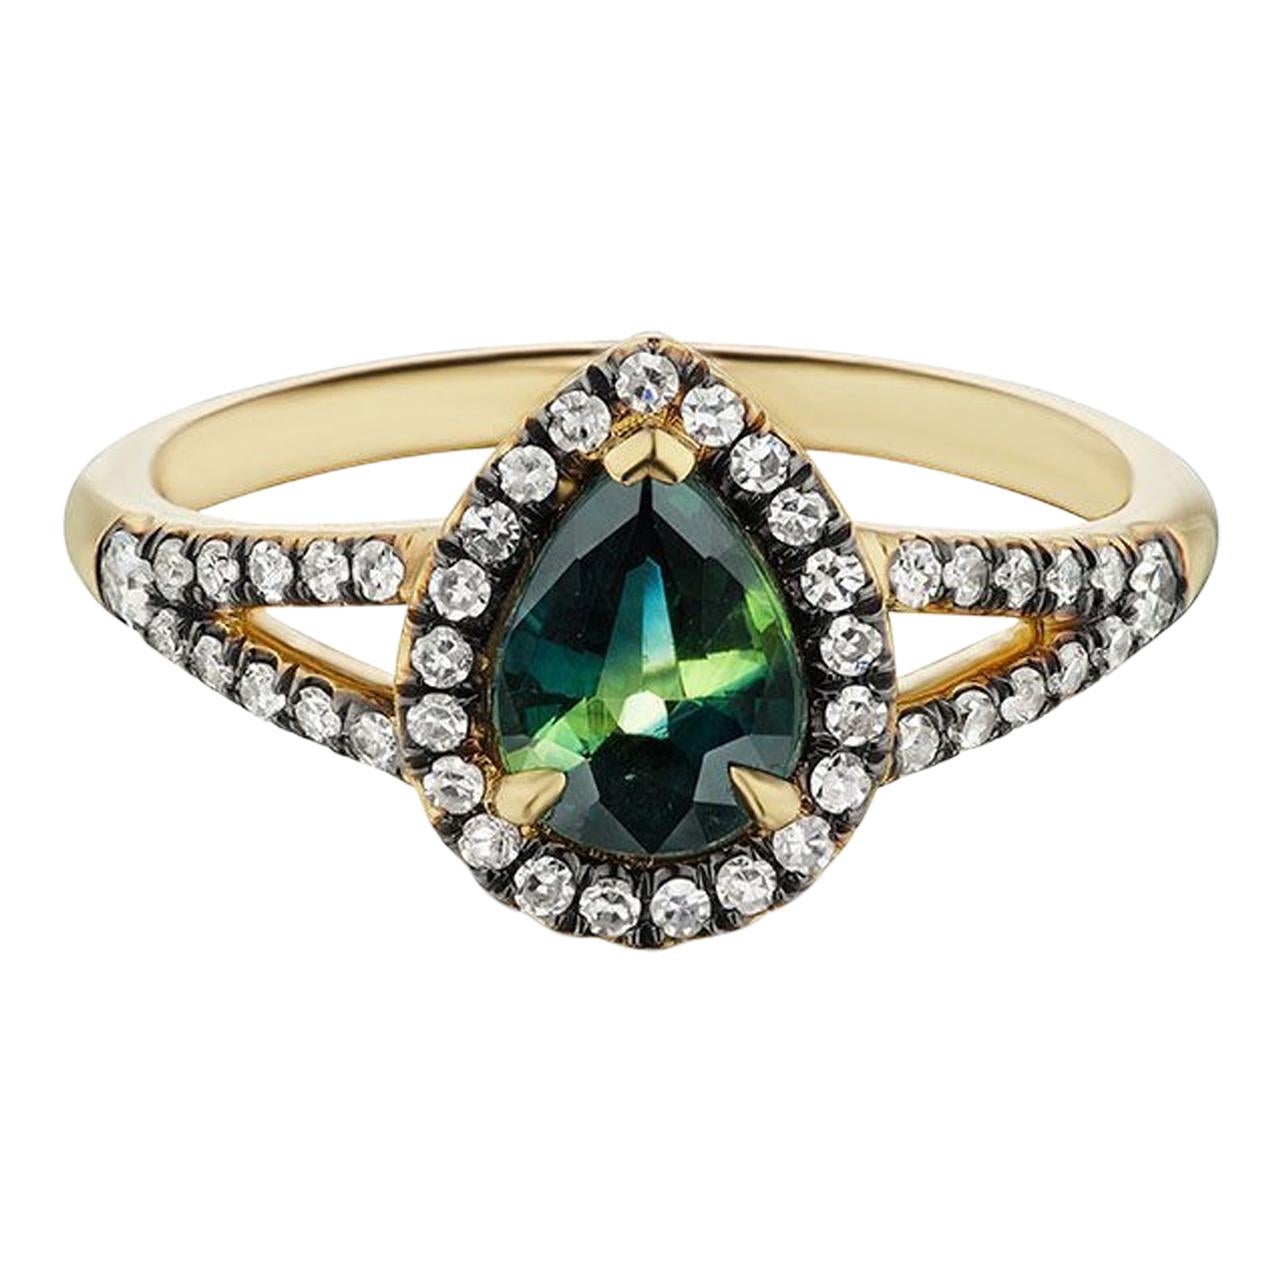 Maniamania Reverie Engagement Ring in 14 Karat Gold with Bi-Color Sapphire For Sale